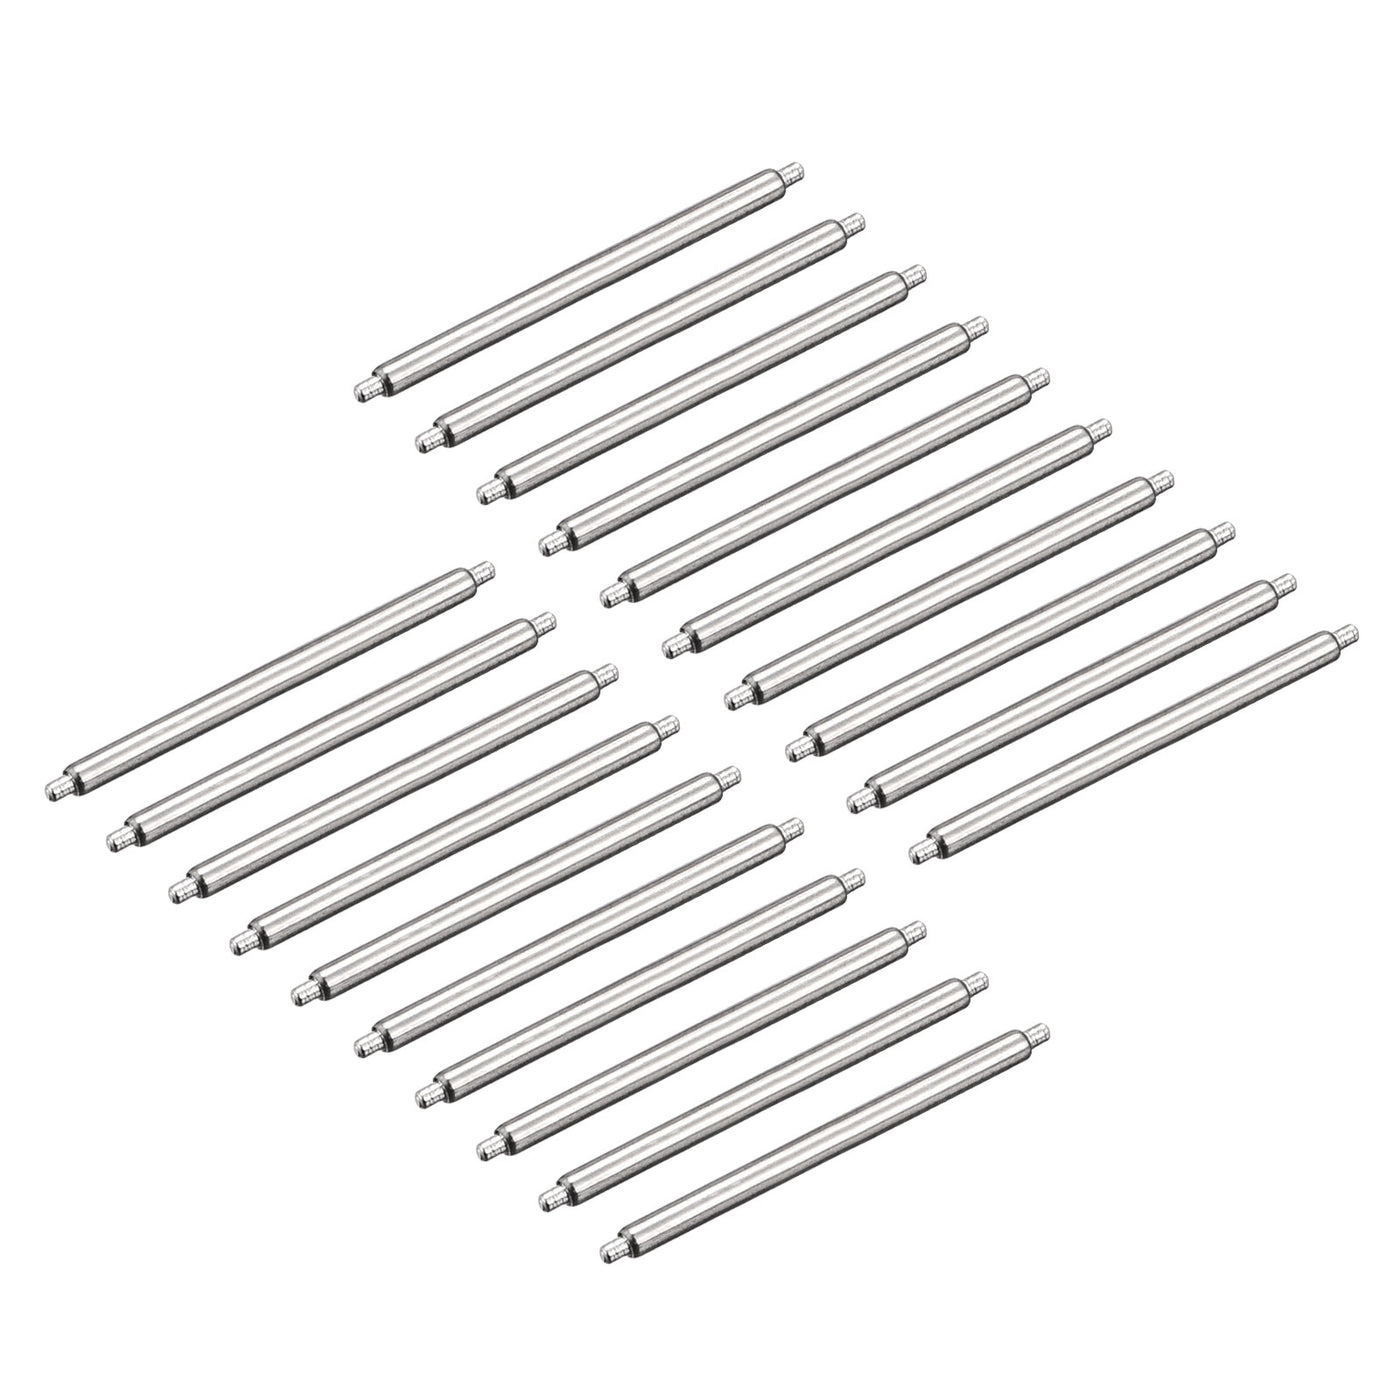 Uxcell Uxcell 20pcs Watch Band Pin 8mm Stainless Steel Spring Bar Pins 1.5mm Dia.